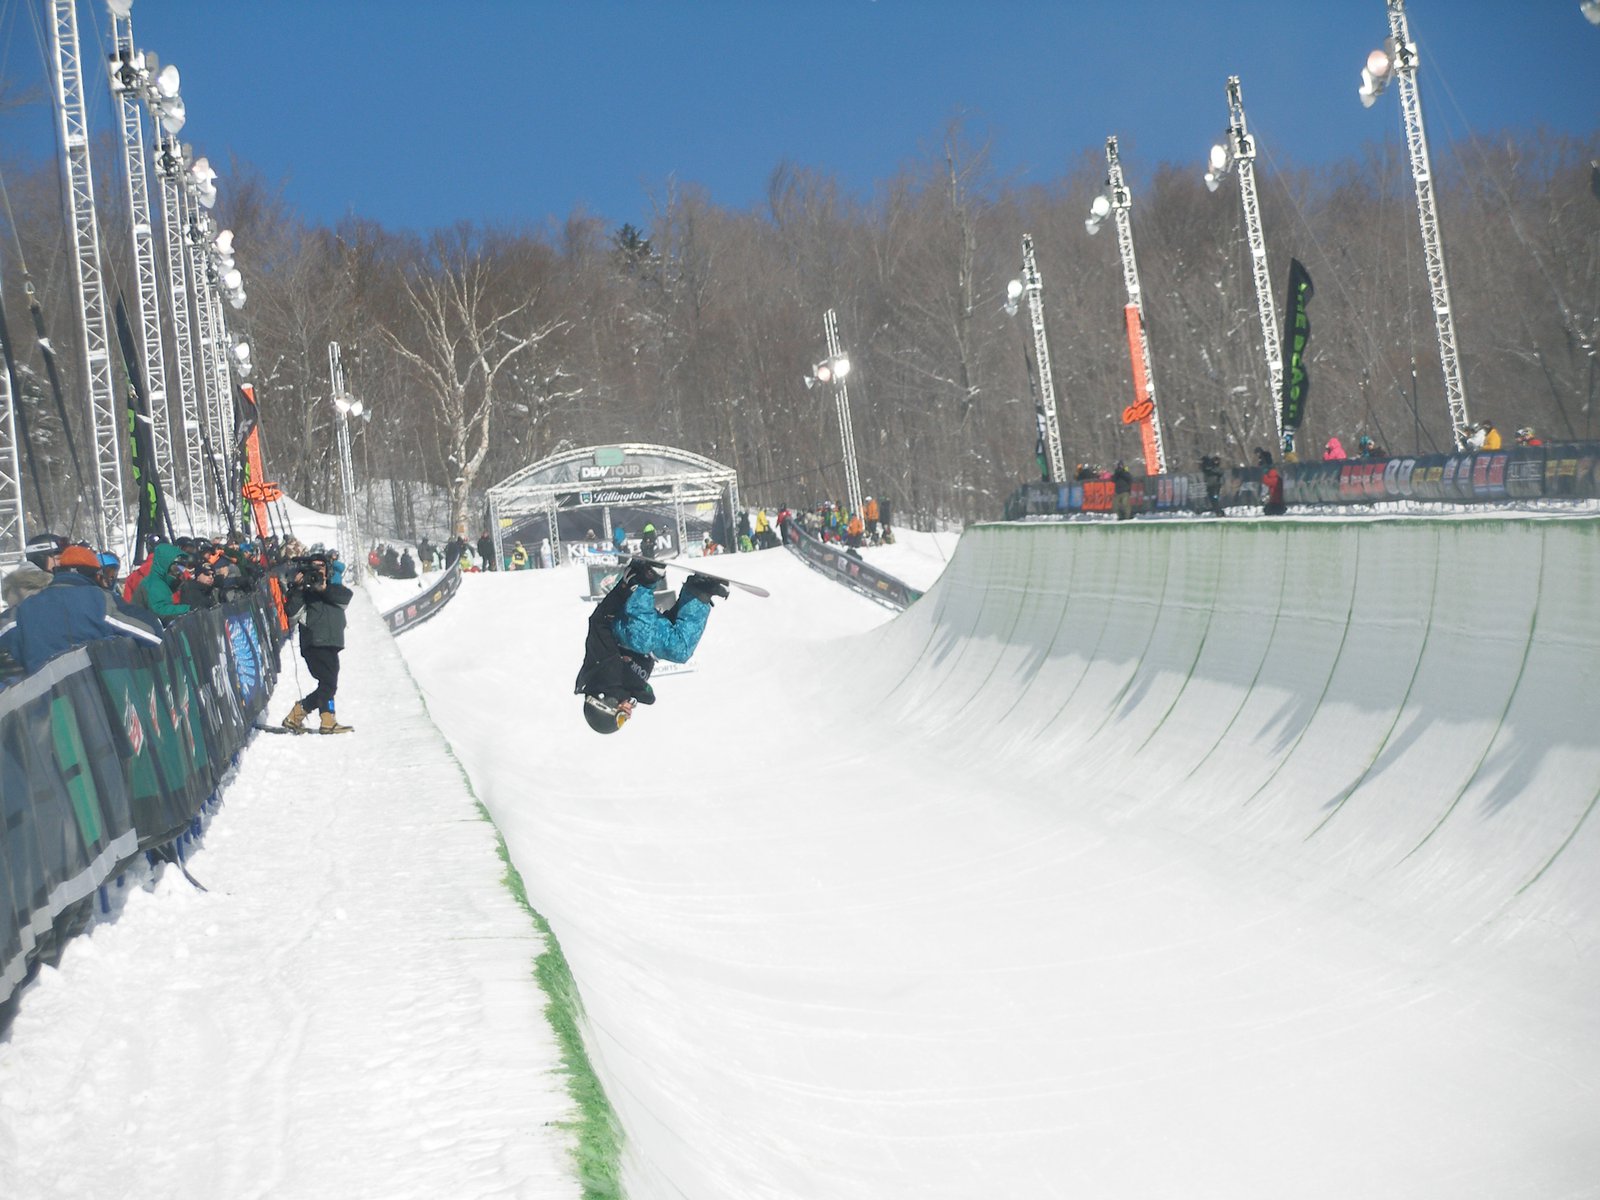 Doing Work in the Super Pipe